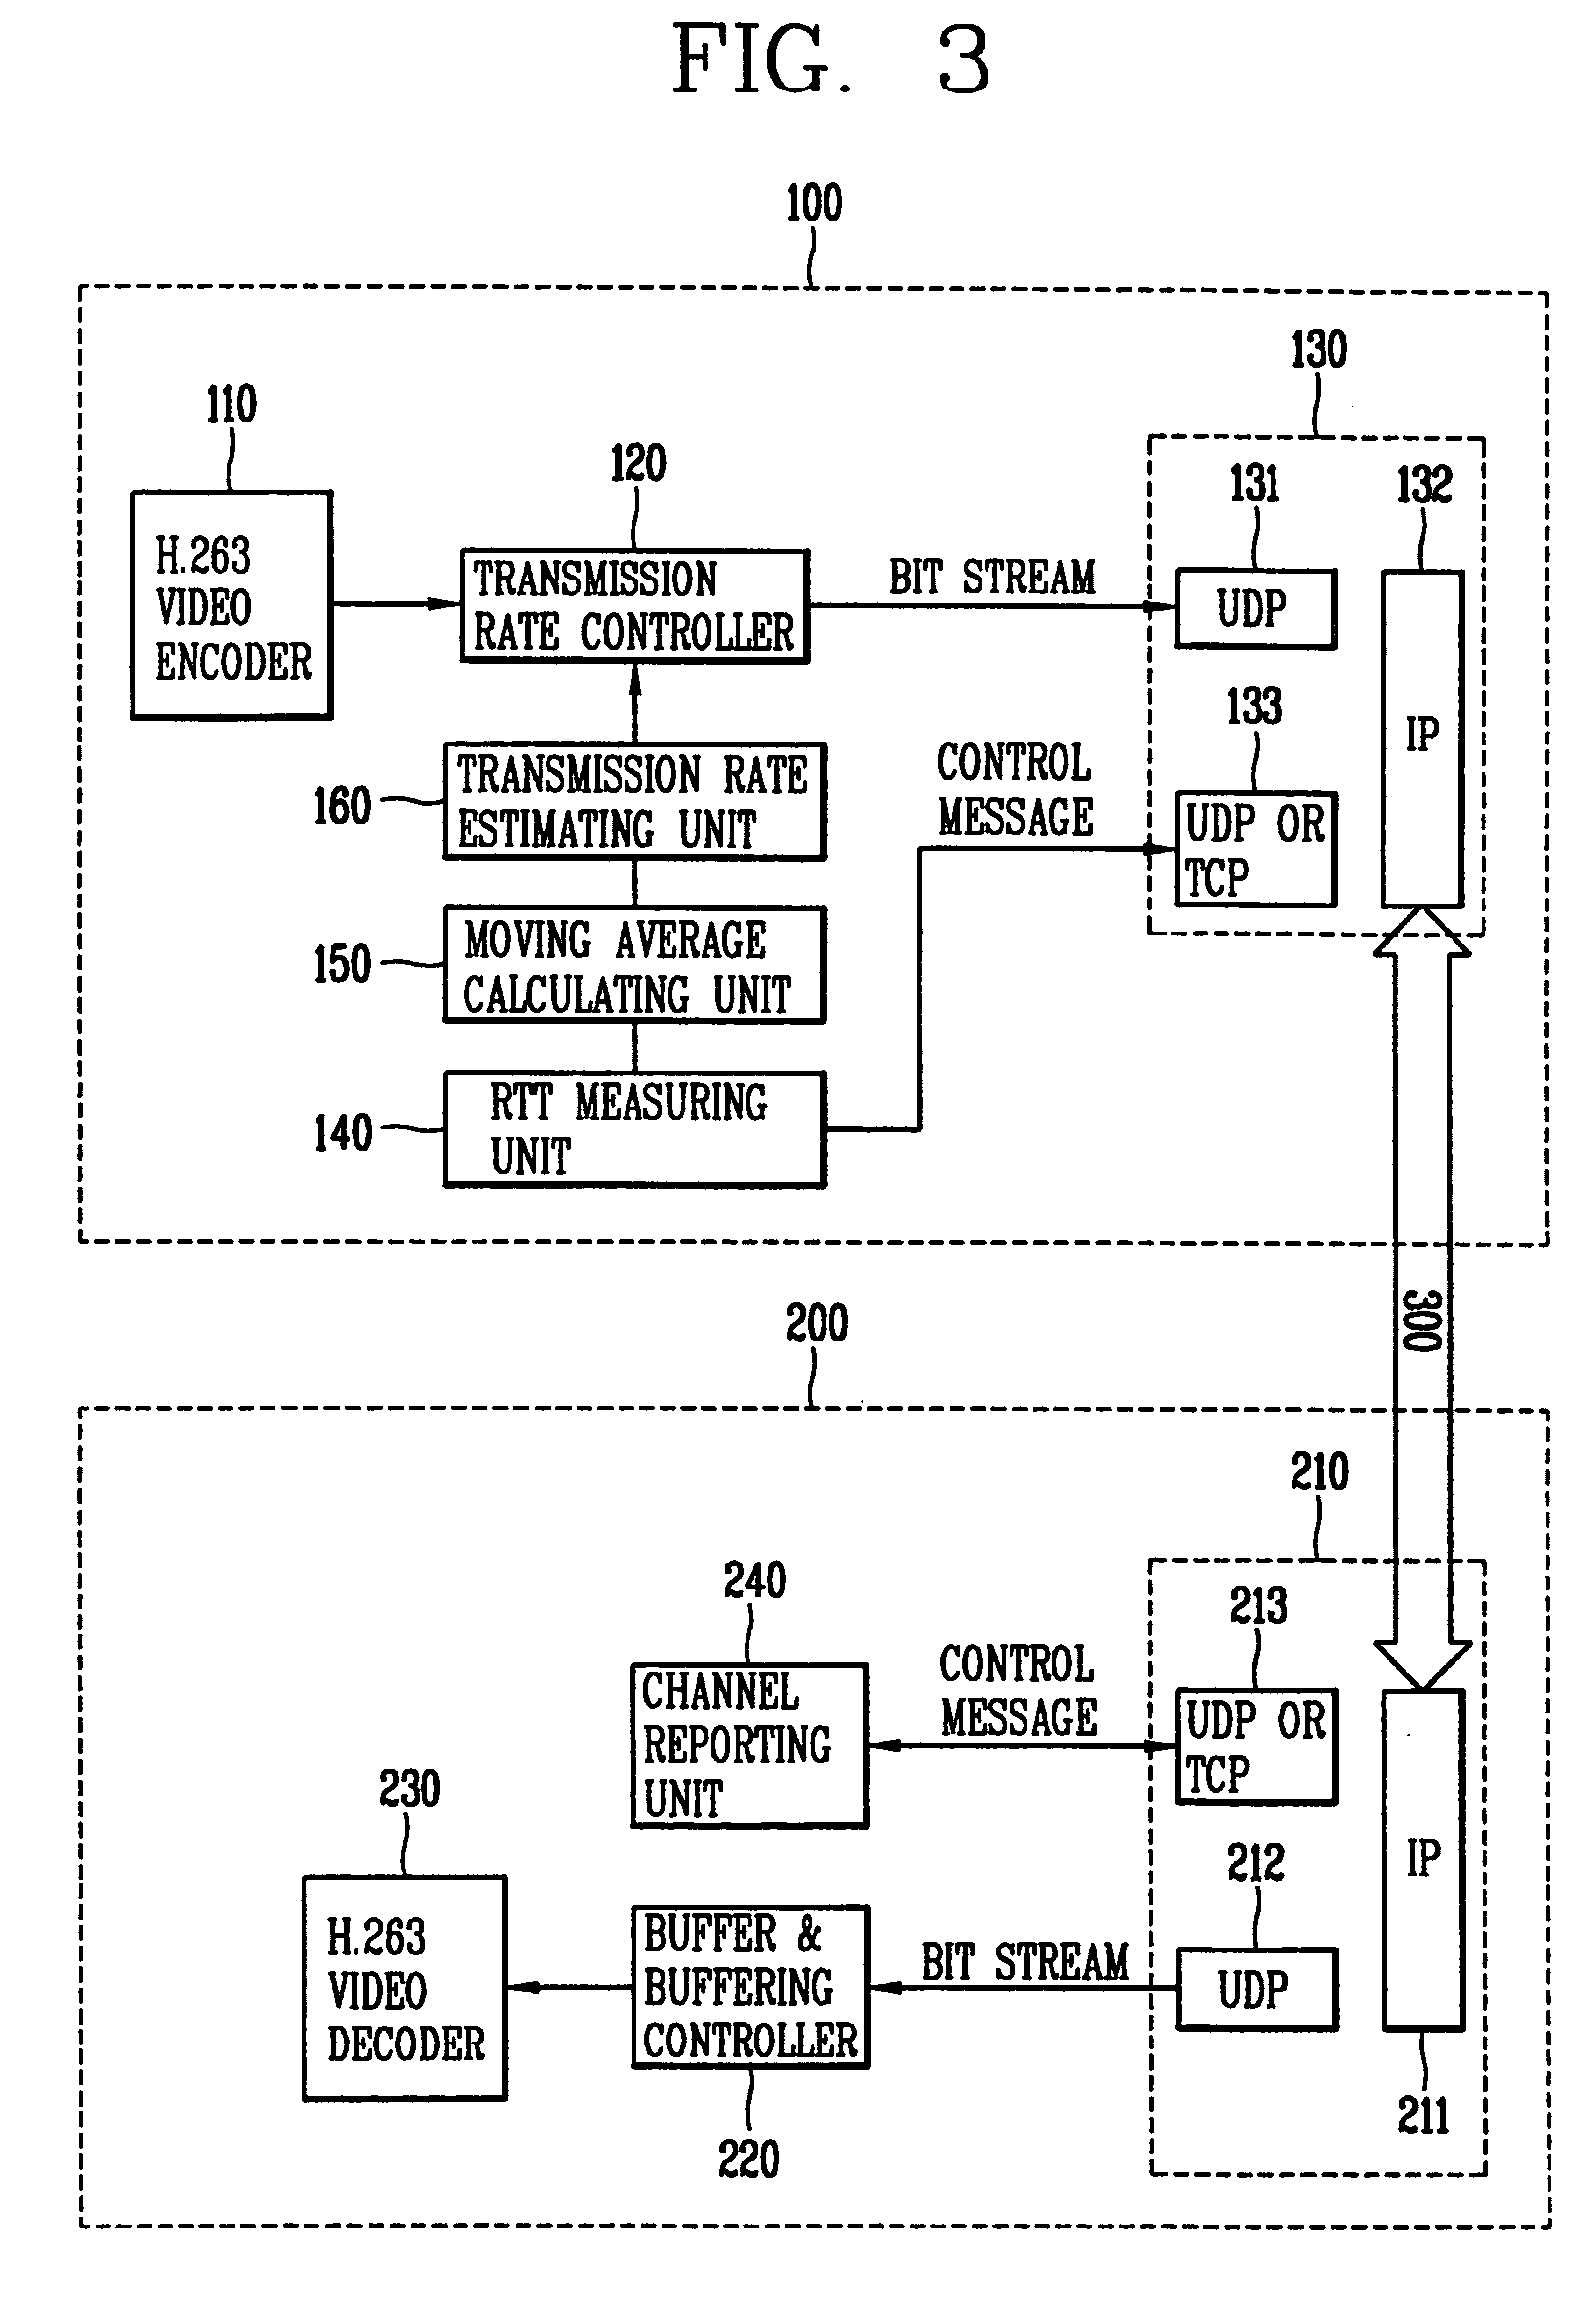 Roundtrip delay time measurement apparatus and method for variable bit rate multimedia data